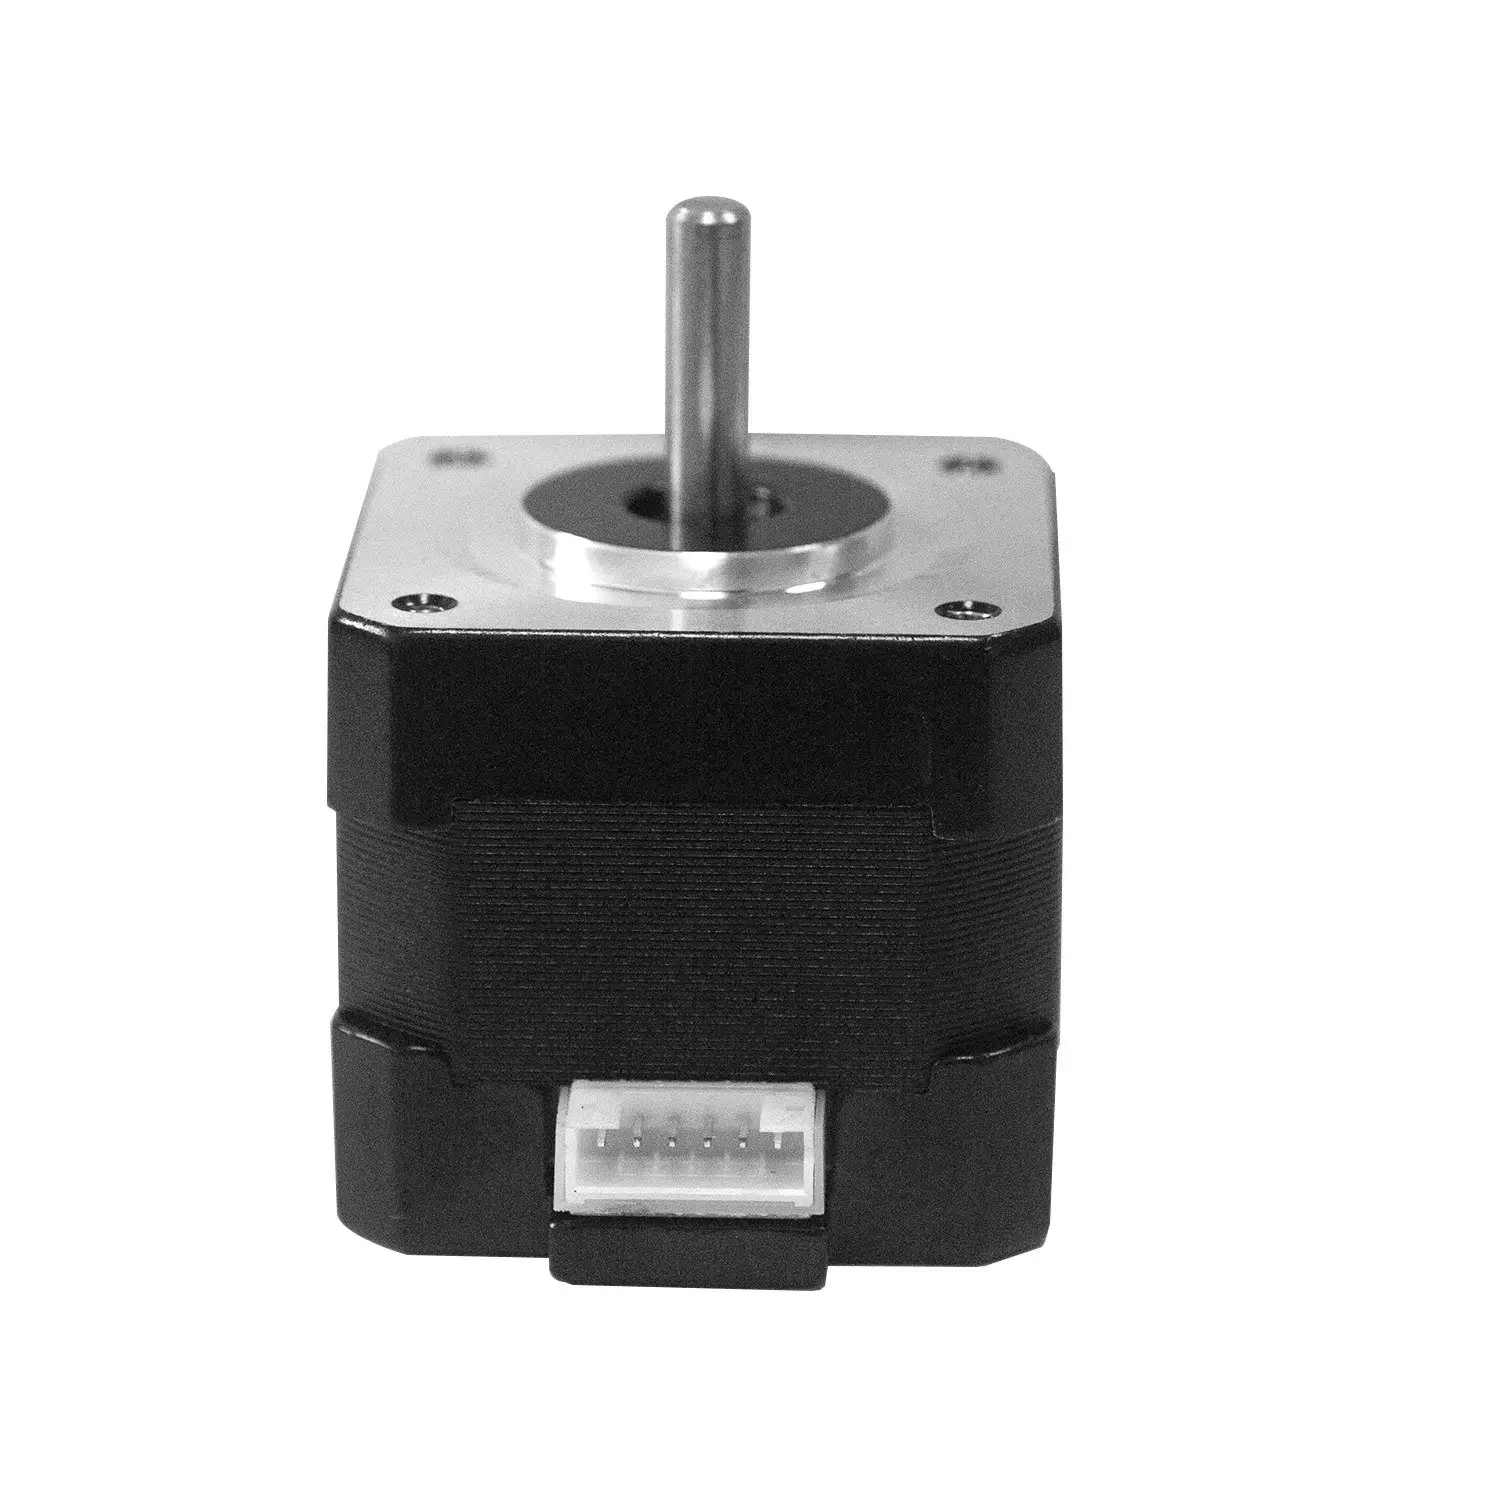 3D Printer Parts 42-40 Stepper Motor 2 Phase 1.8 Degree Step Angle 0.4N.M 1A Step Motor (17HS4401) for Creality CR-10 CR-10S End